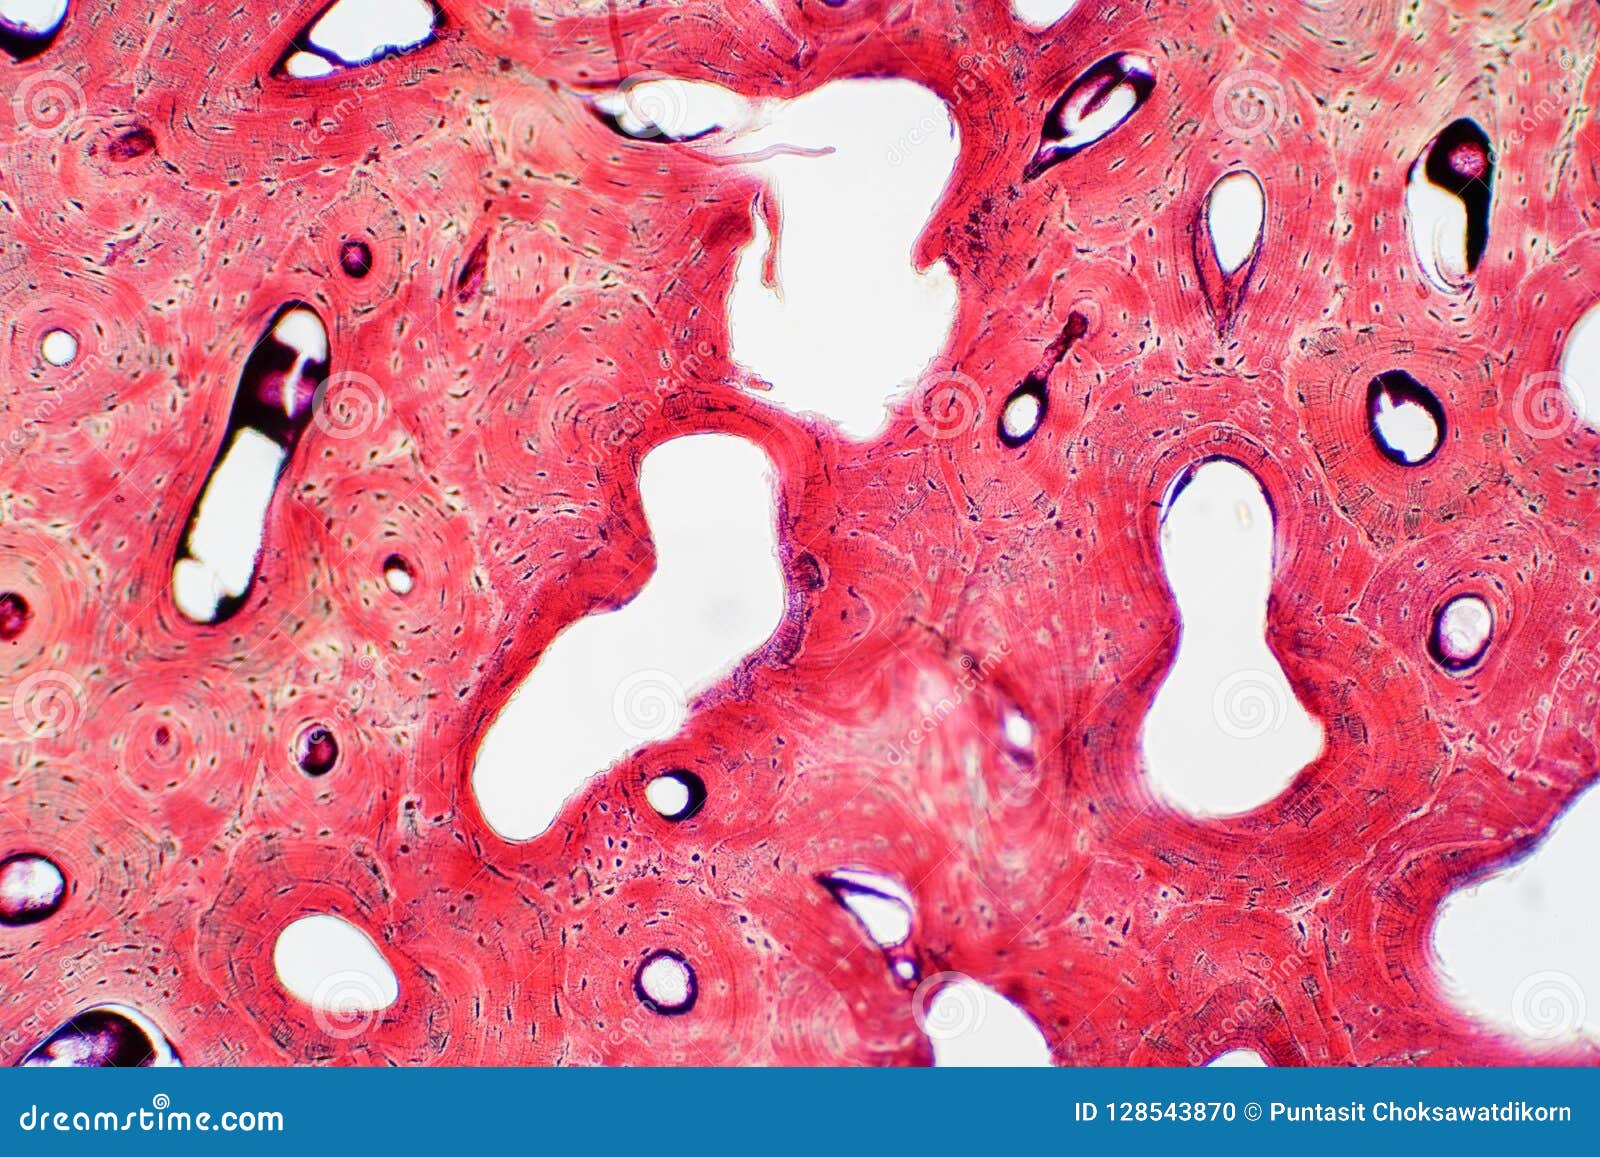 histology of human compact bone tissue under microscope view for